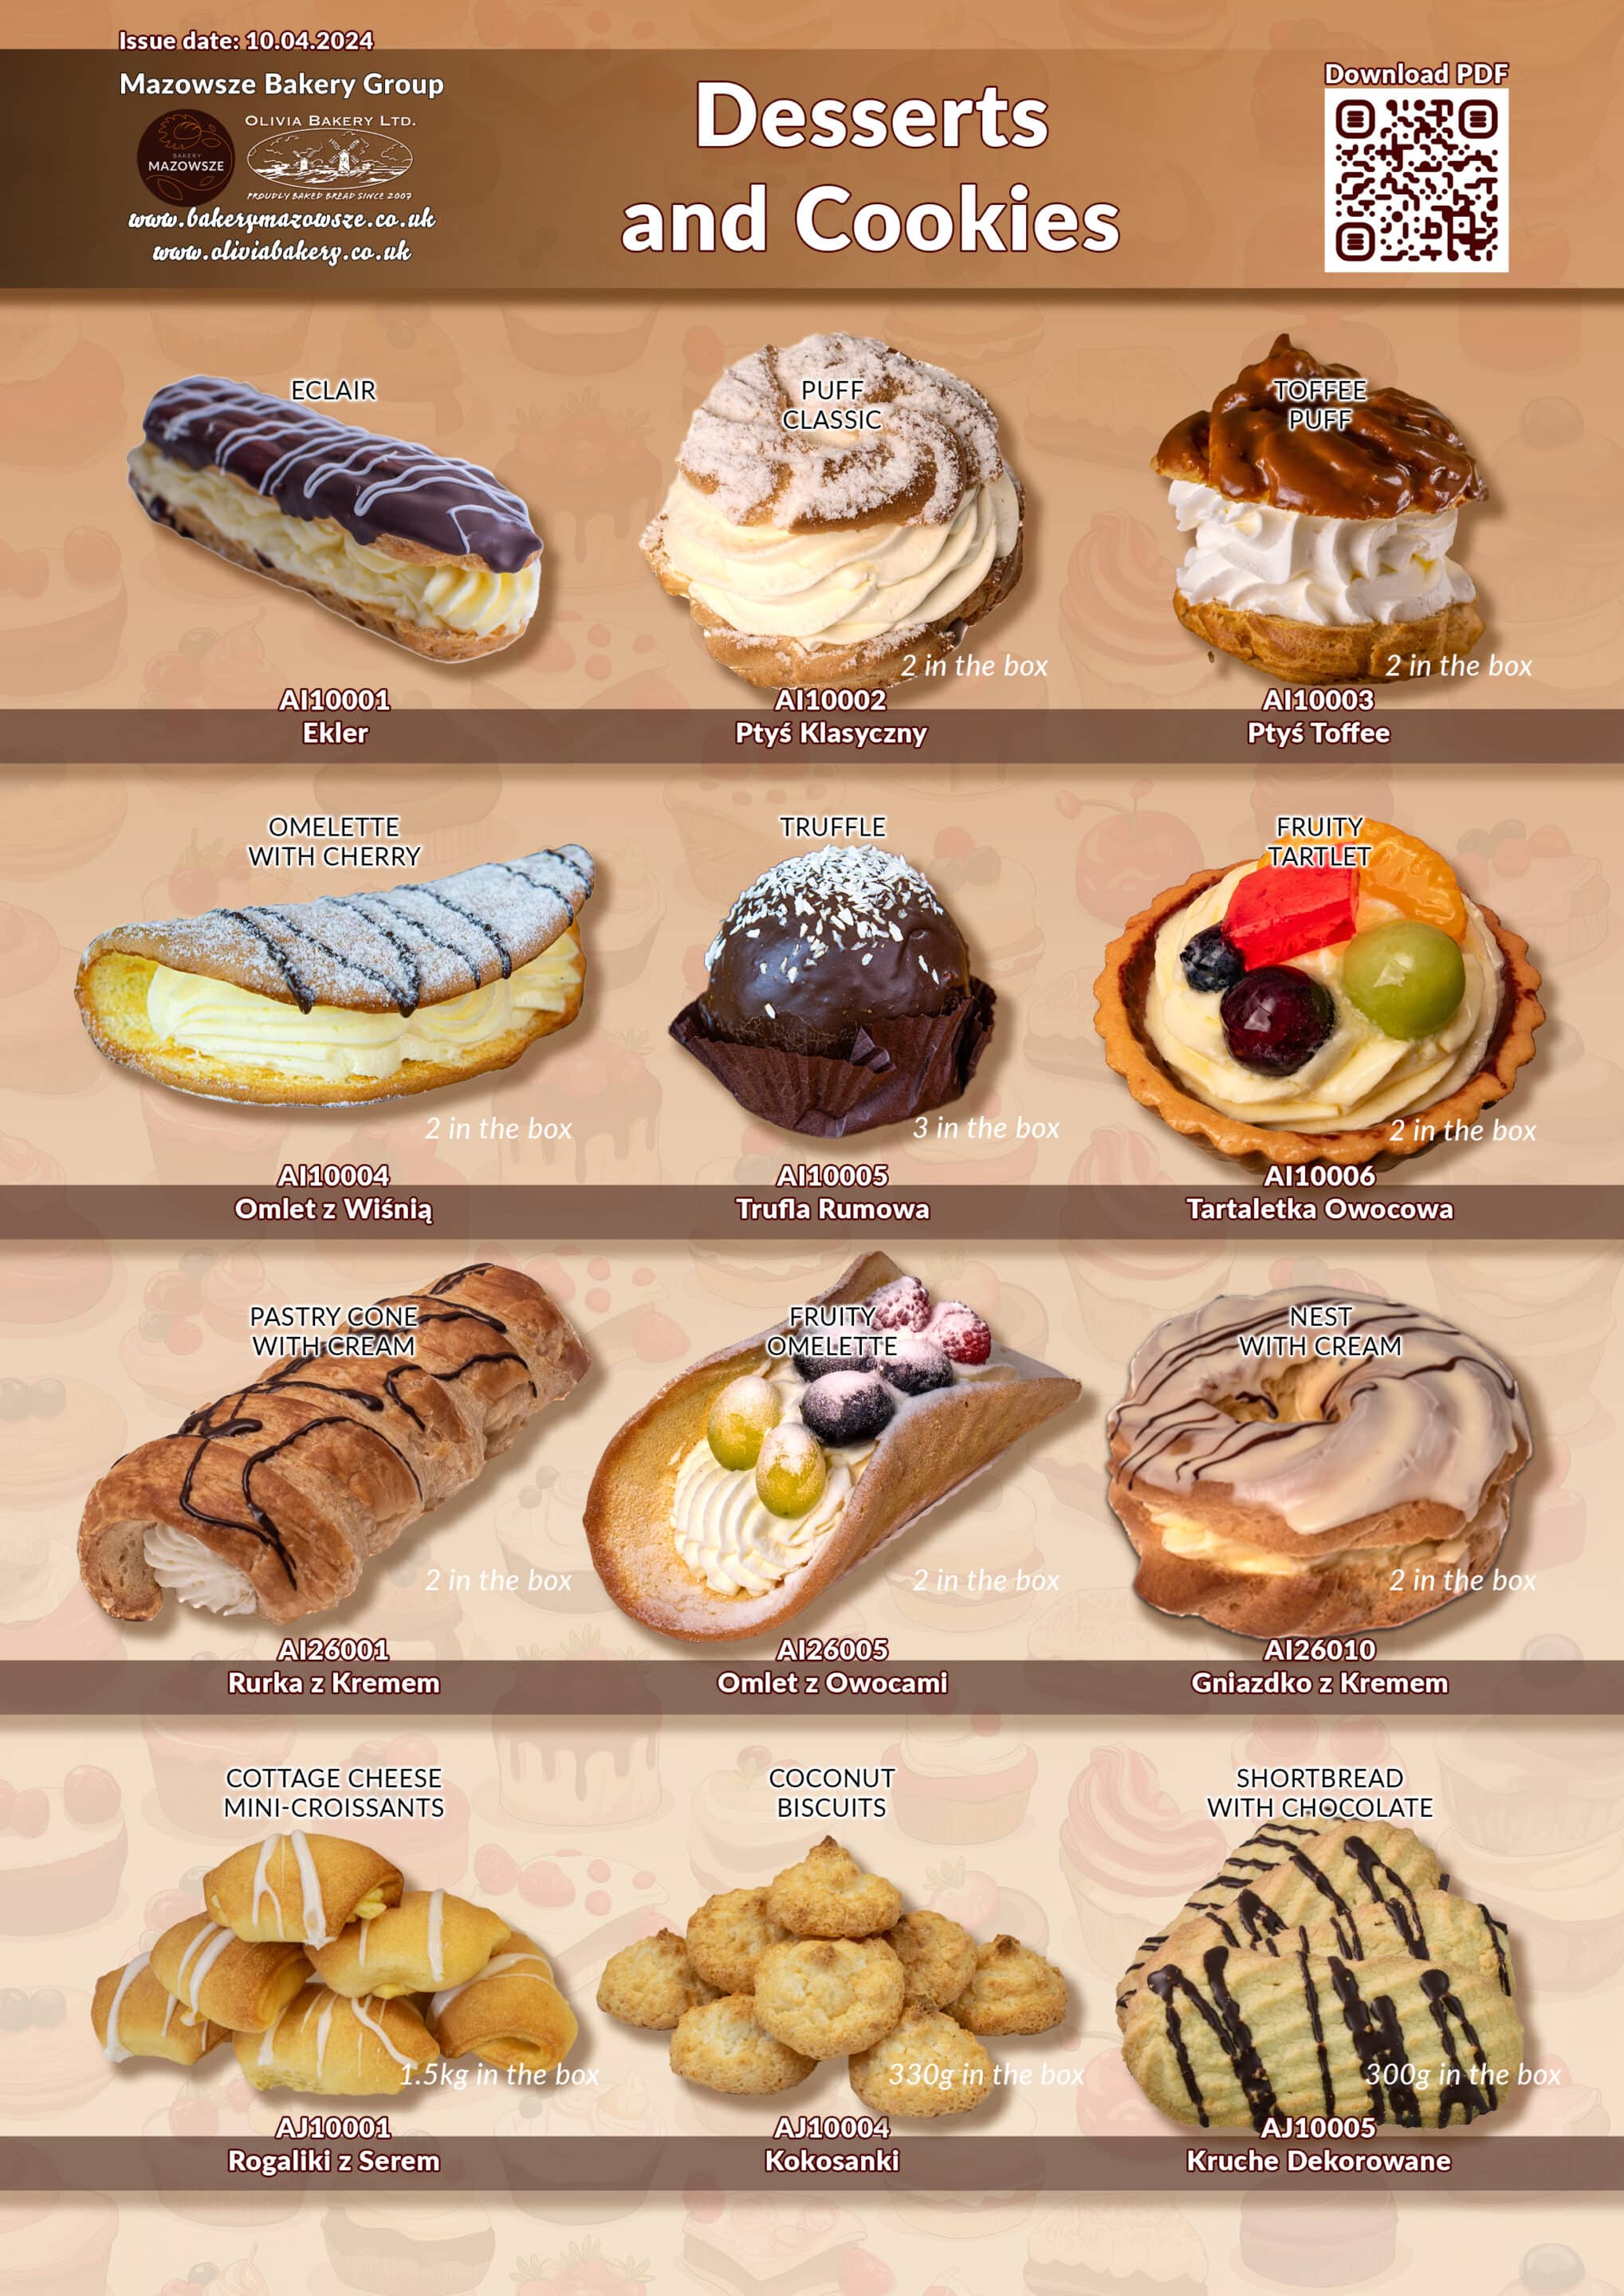 Selection of desserts and cookies from Mazowsze Bakery Group, including eclairs, pastries, and mini-croissants.